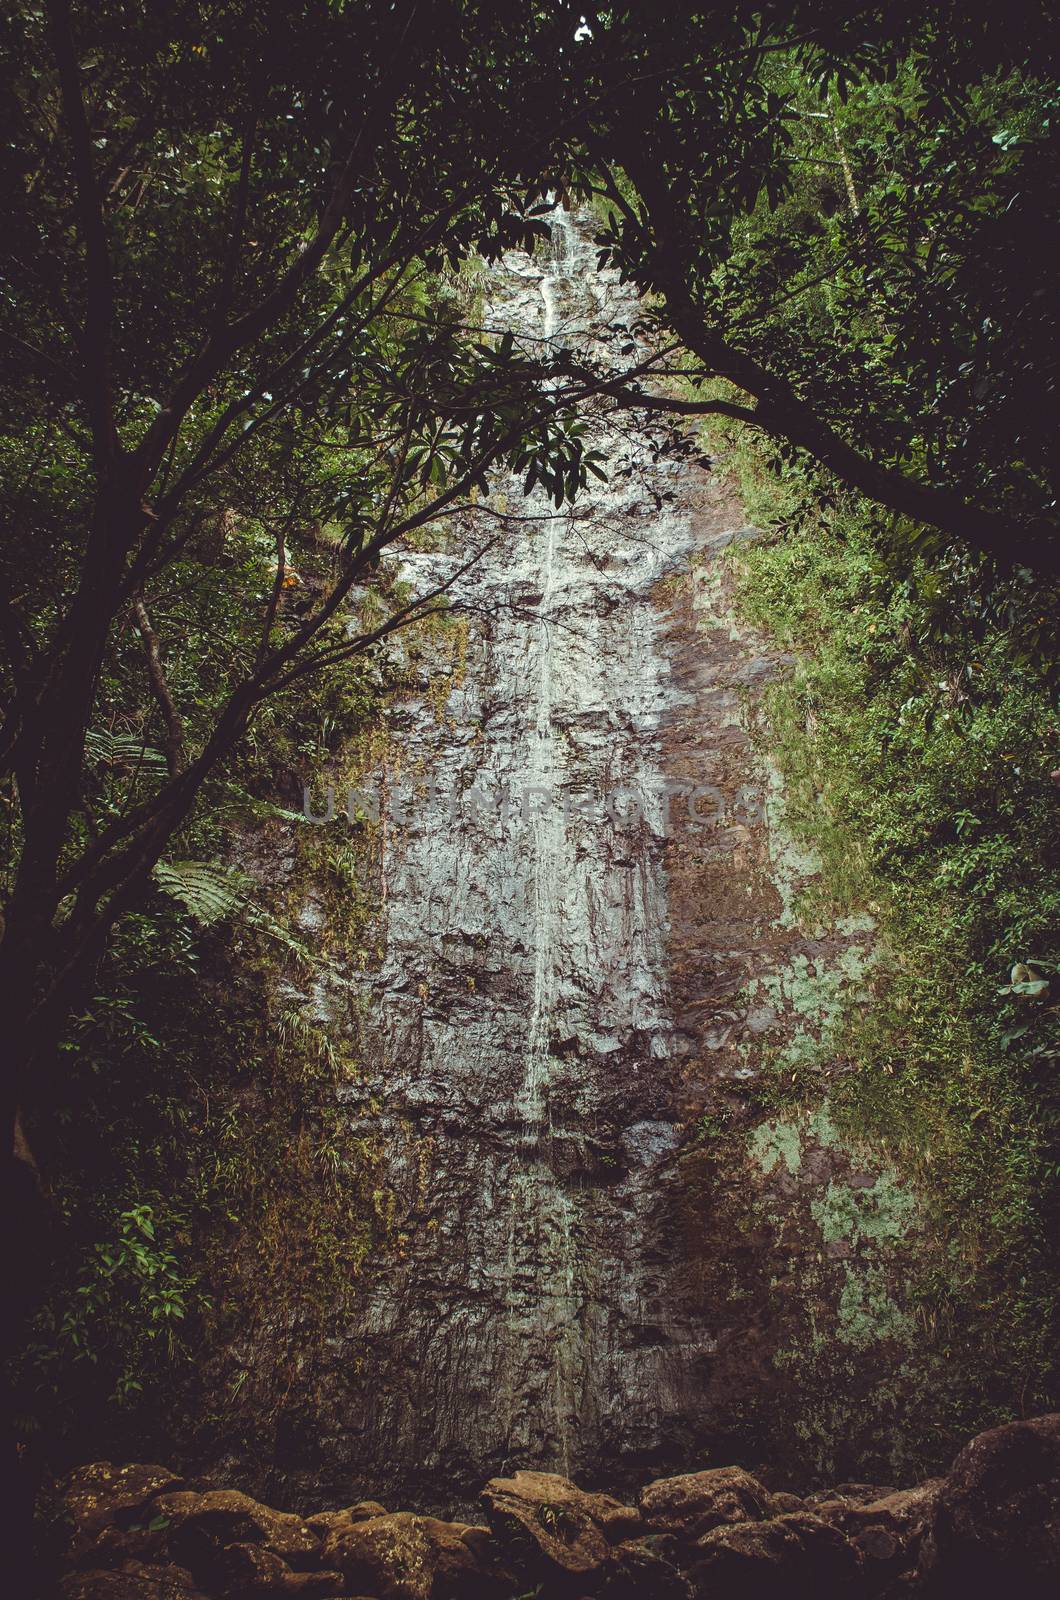 One of the many little waterfalls that cover Hawaii rain forests